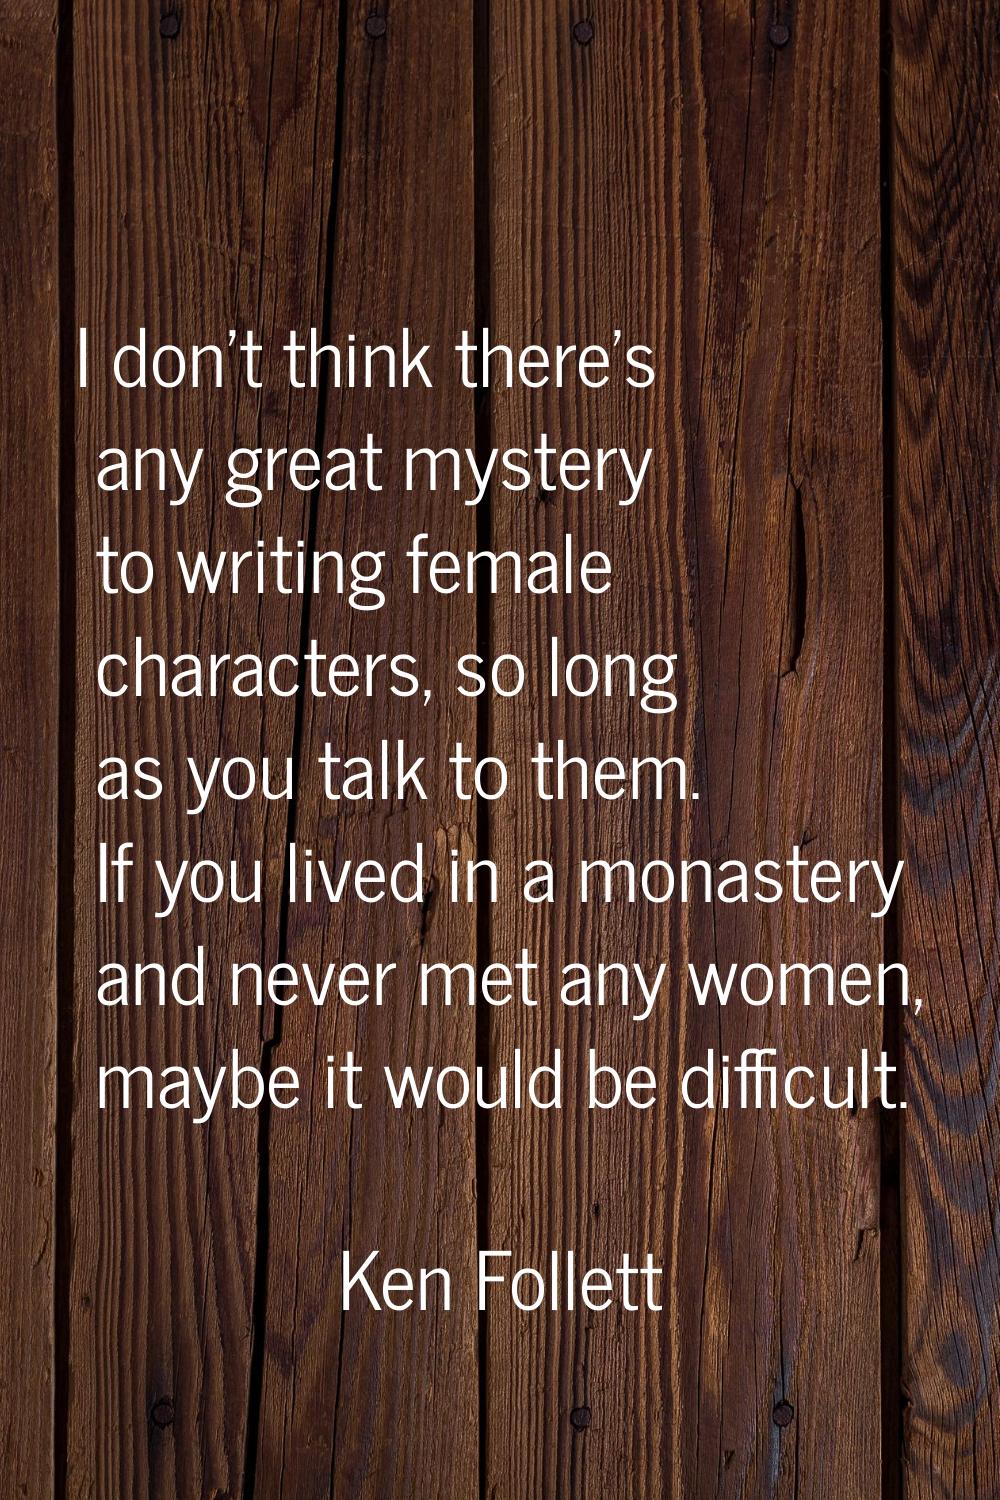 I don't think there's any great mystery to writing female characters, so long as you talk to them. 